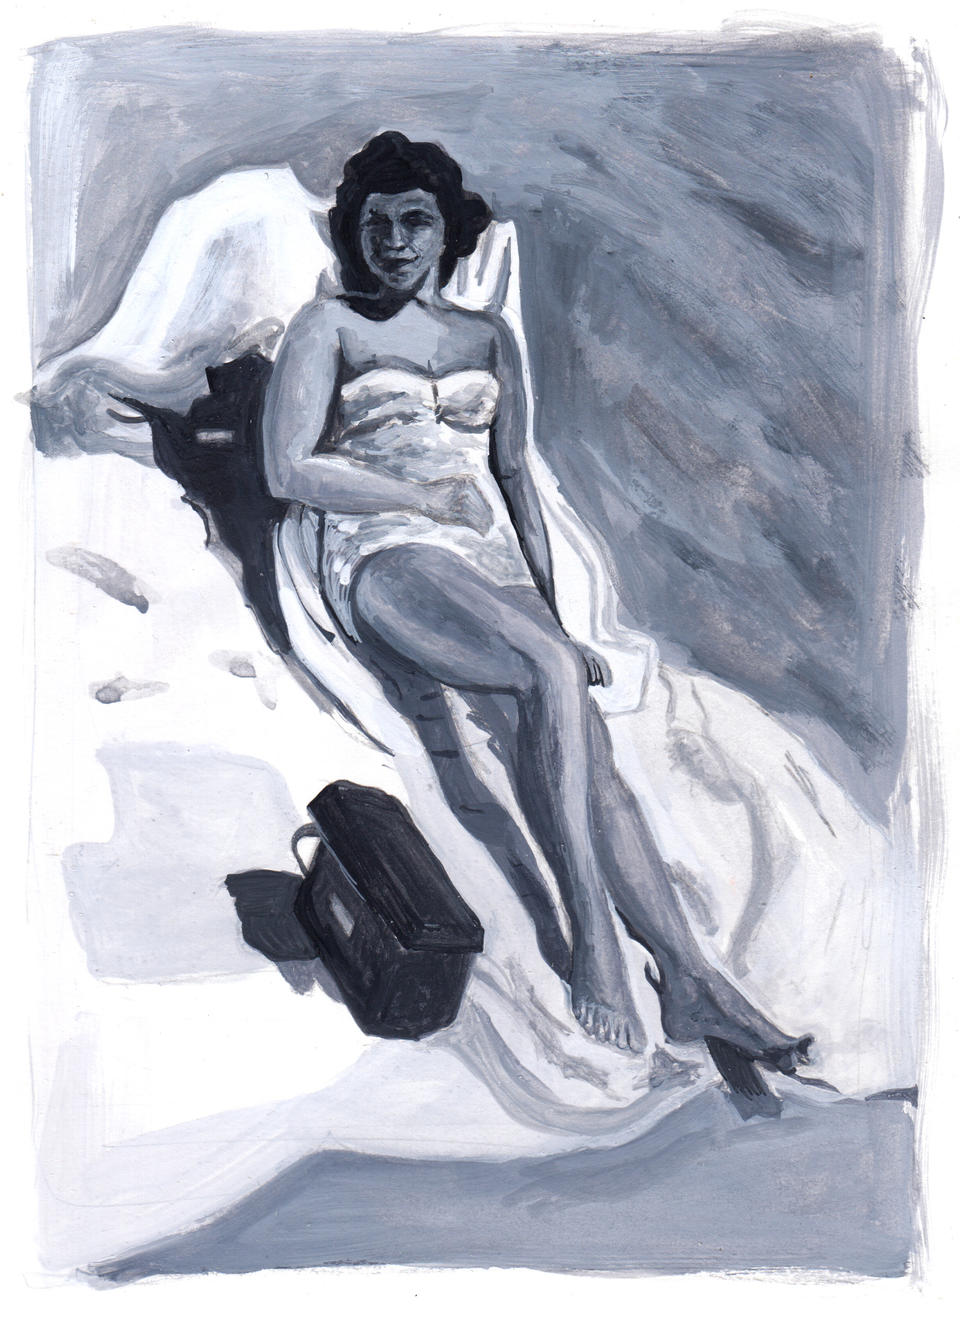 A black and white gouache painting of a woman sitting on the beach. My great grandma Hildy.